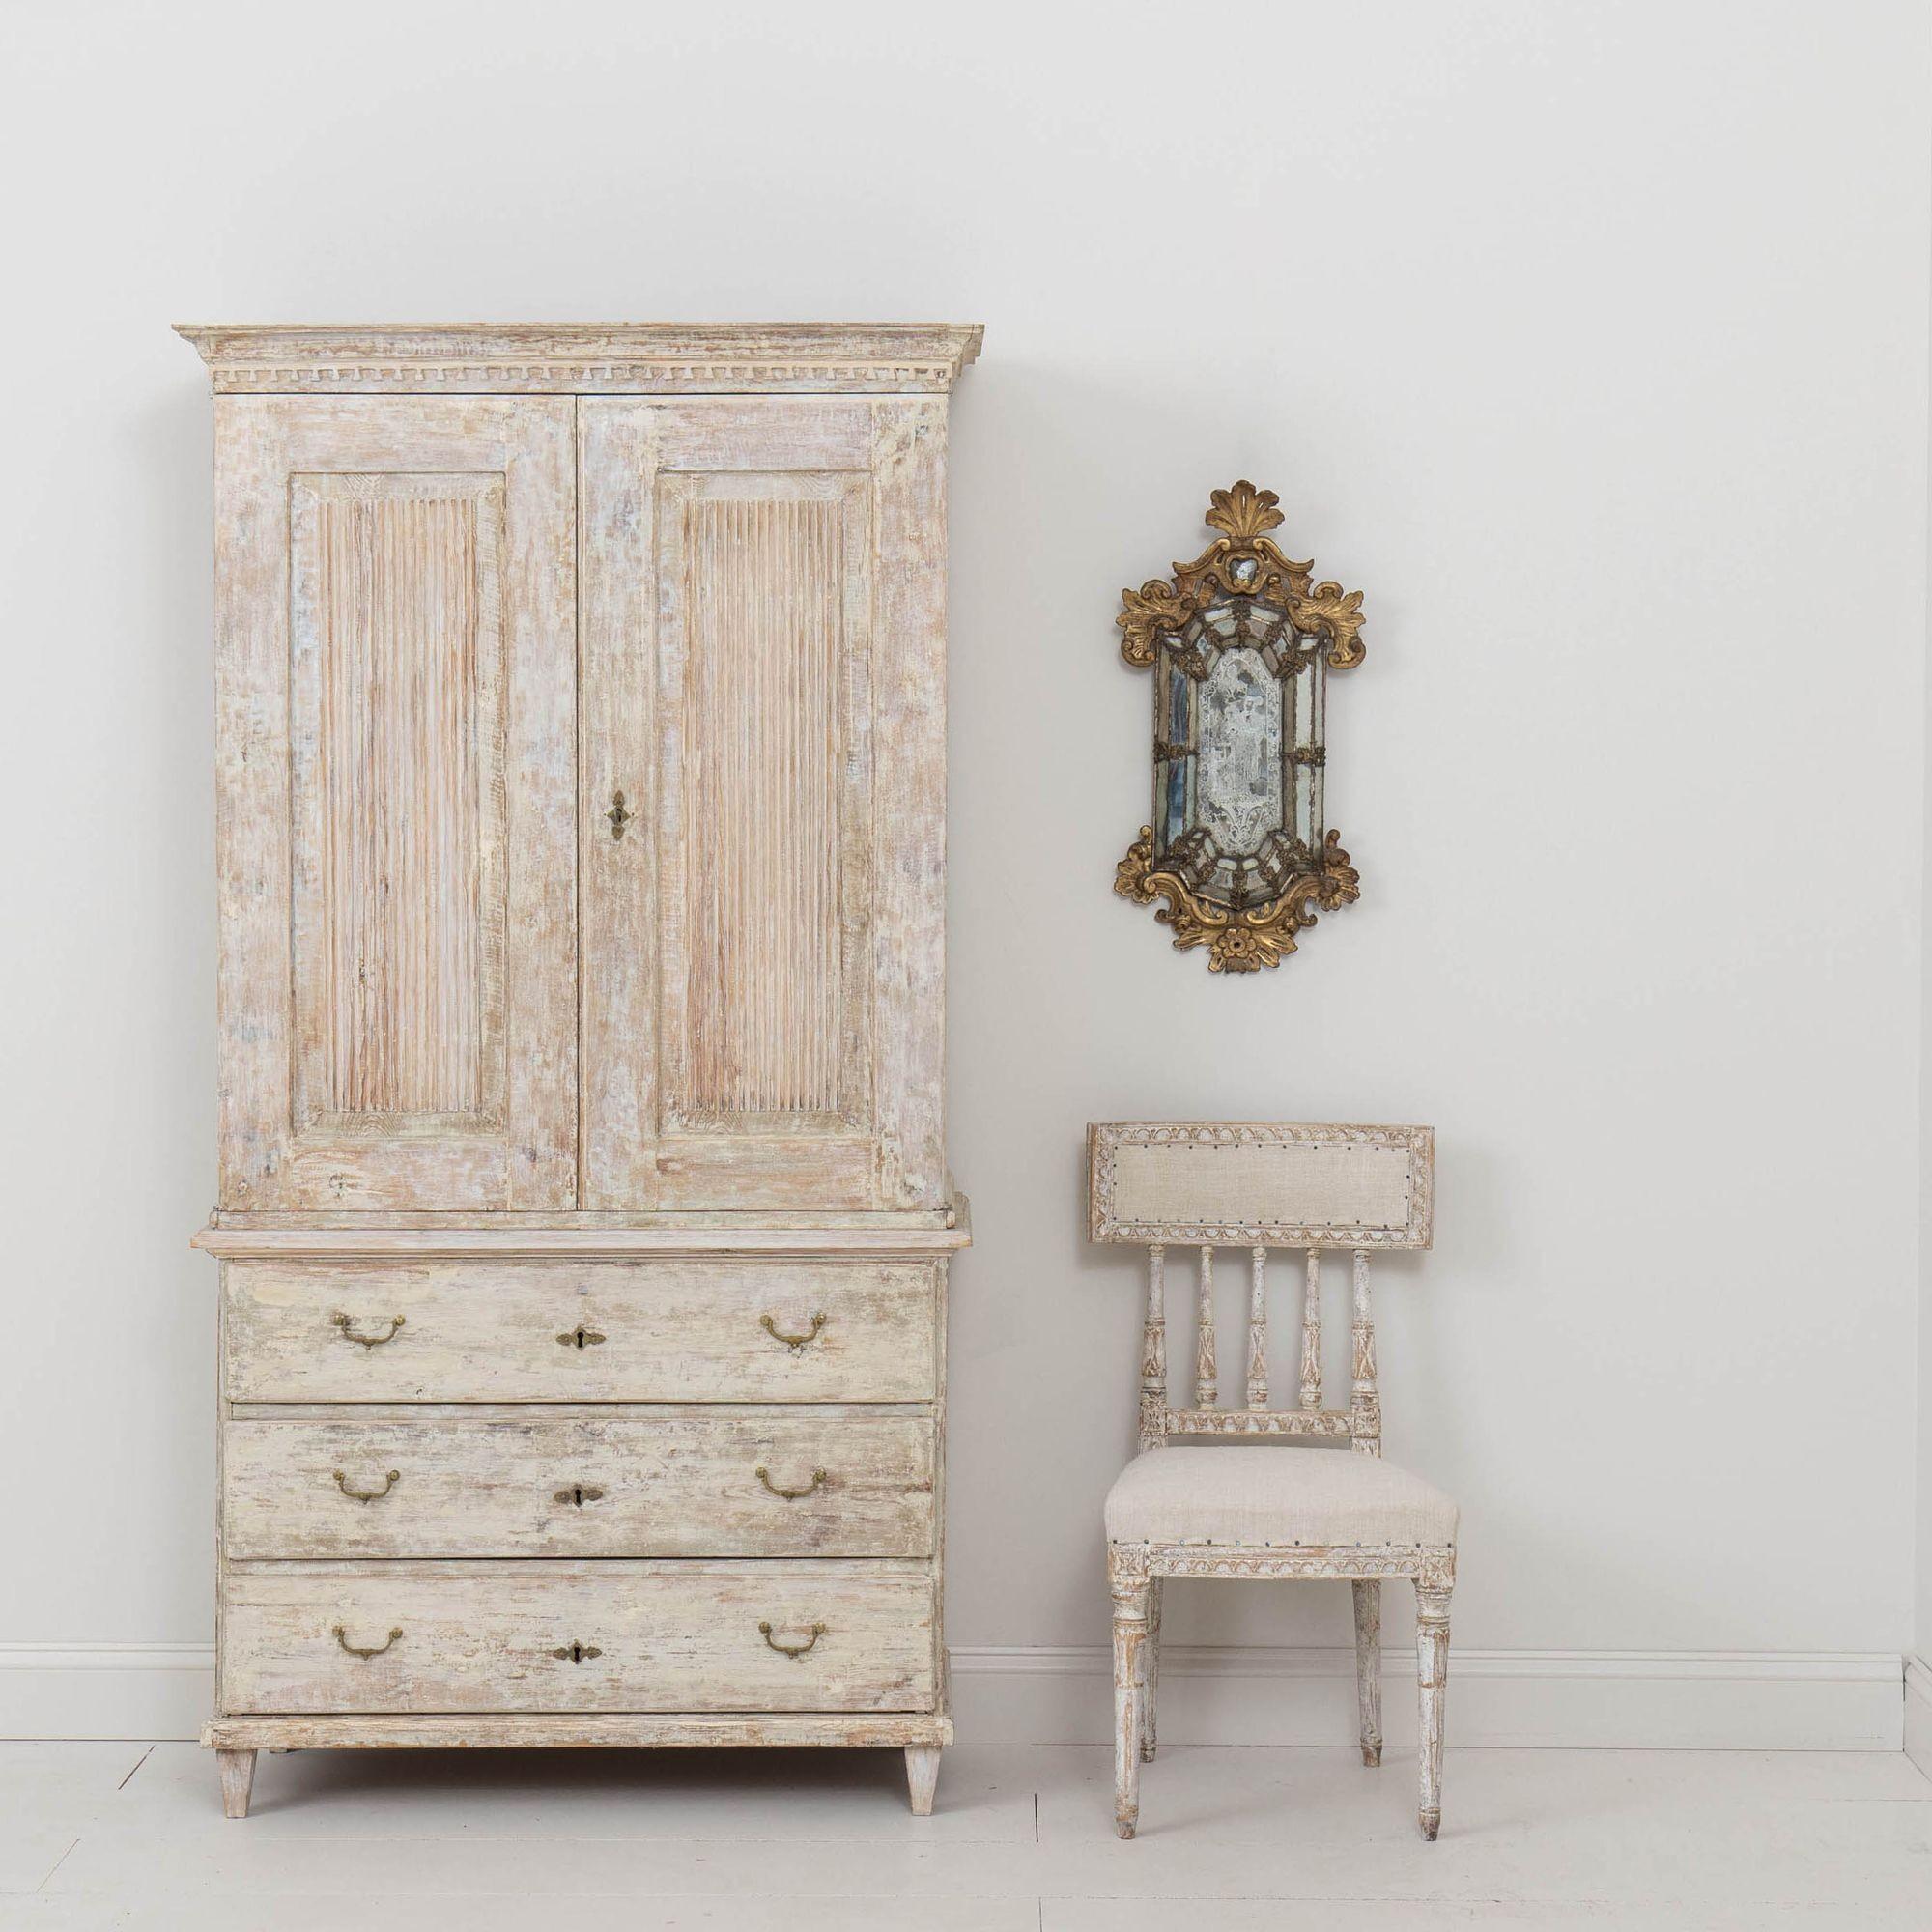 A 19th century Swedish Gustavian period cabinet from Stockholm dry scraped back to reveal the original paint and natural wood surface. Circa 1810. This beautiful cabinet has beautifully carved molding around the top, two large reeded doors above